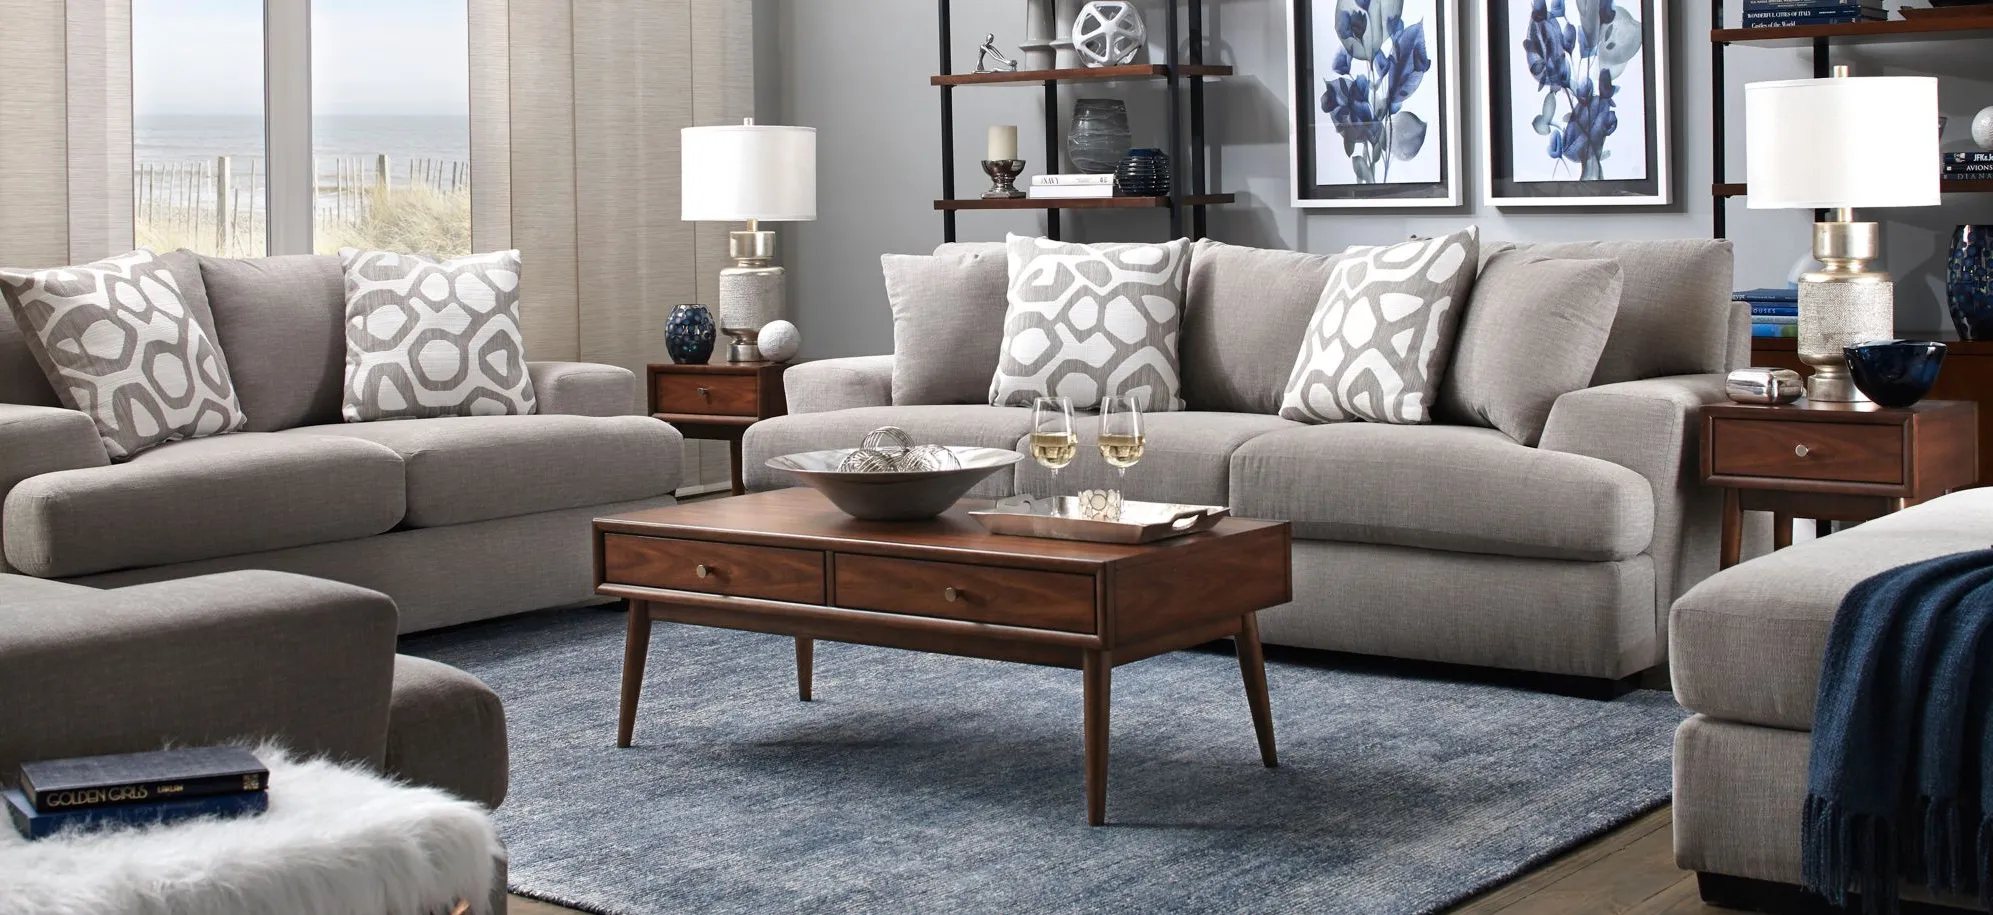 Hendrick 2-pc. Sofa and Loveseat Set in Taupe by Style Line